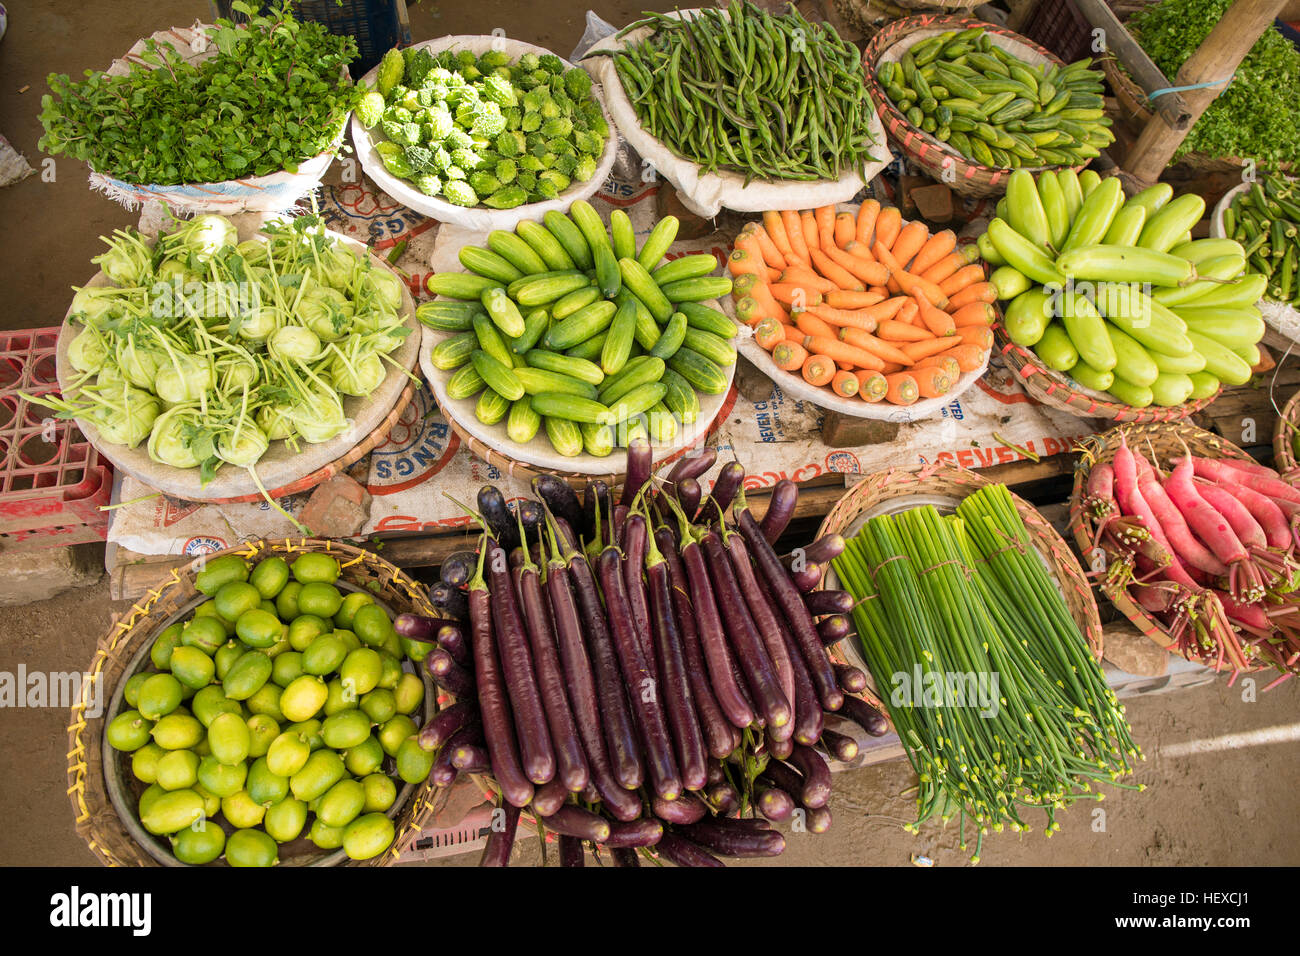 A local organic streetfood market with fresh vegetables Stock Photo